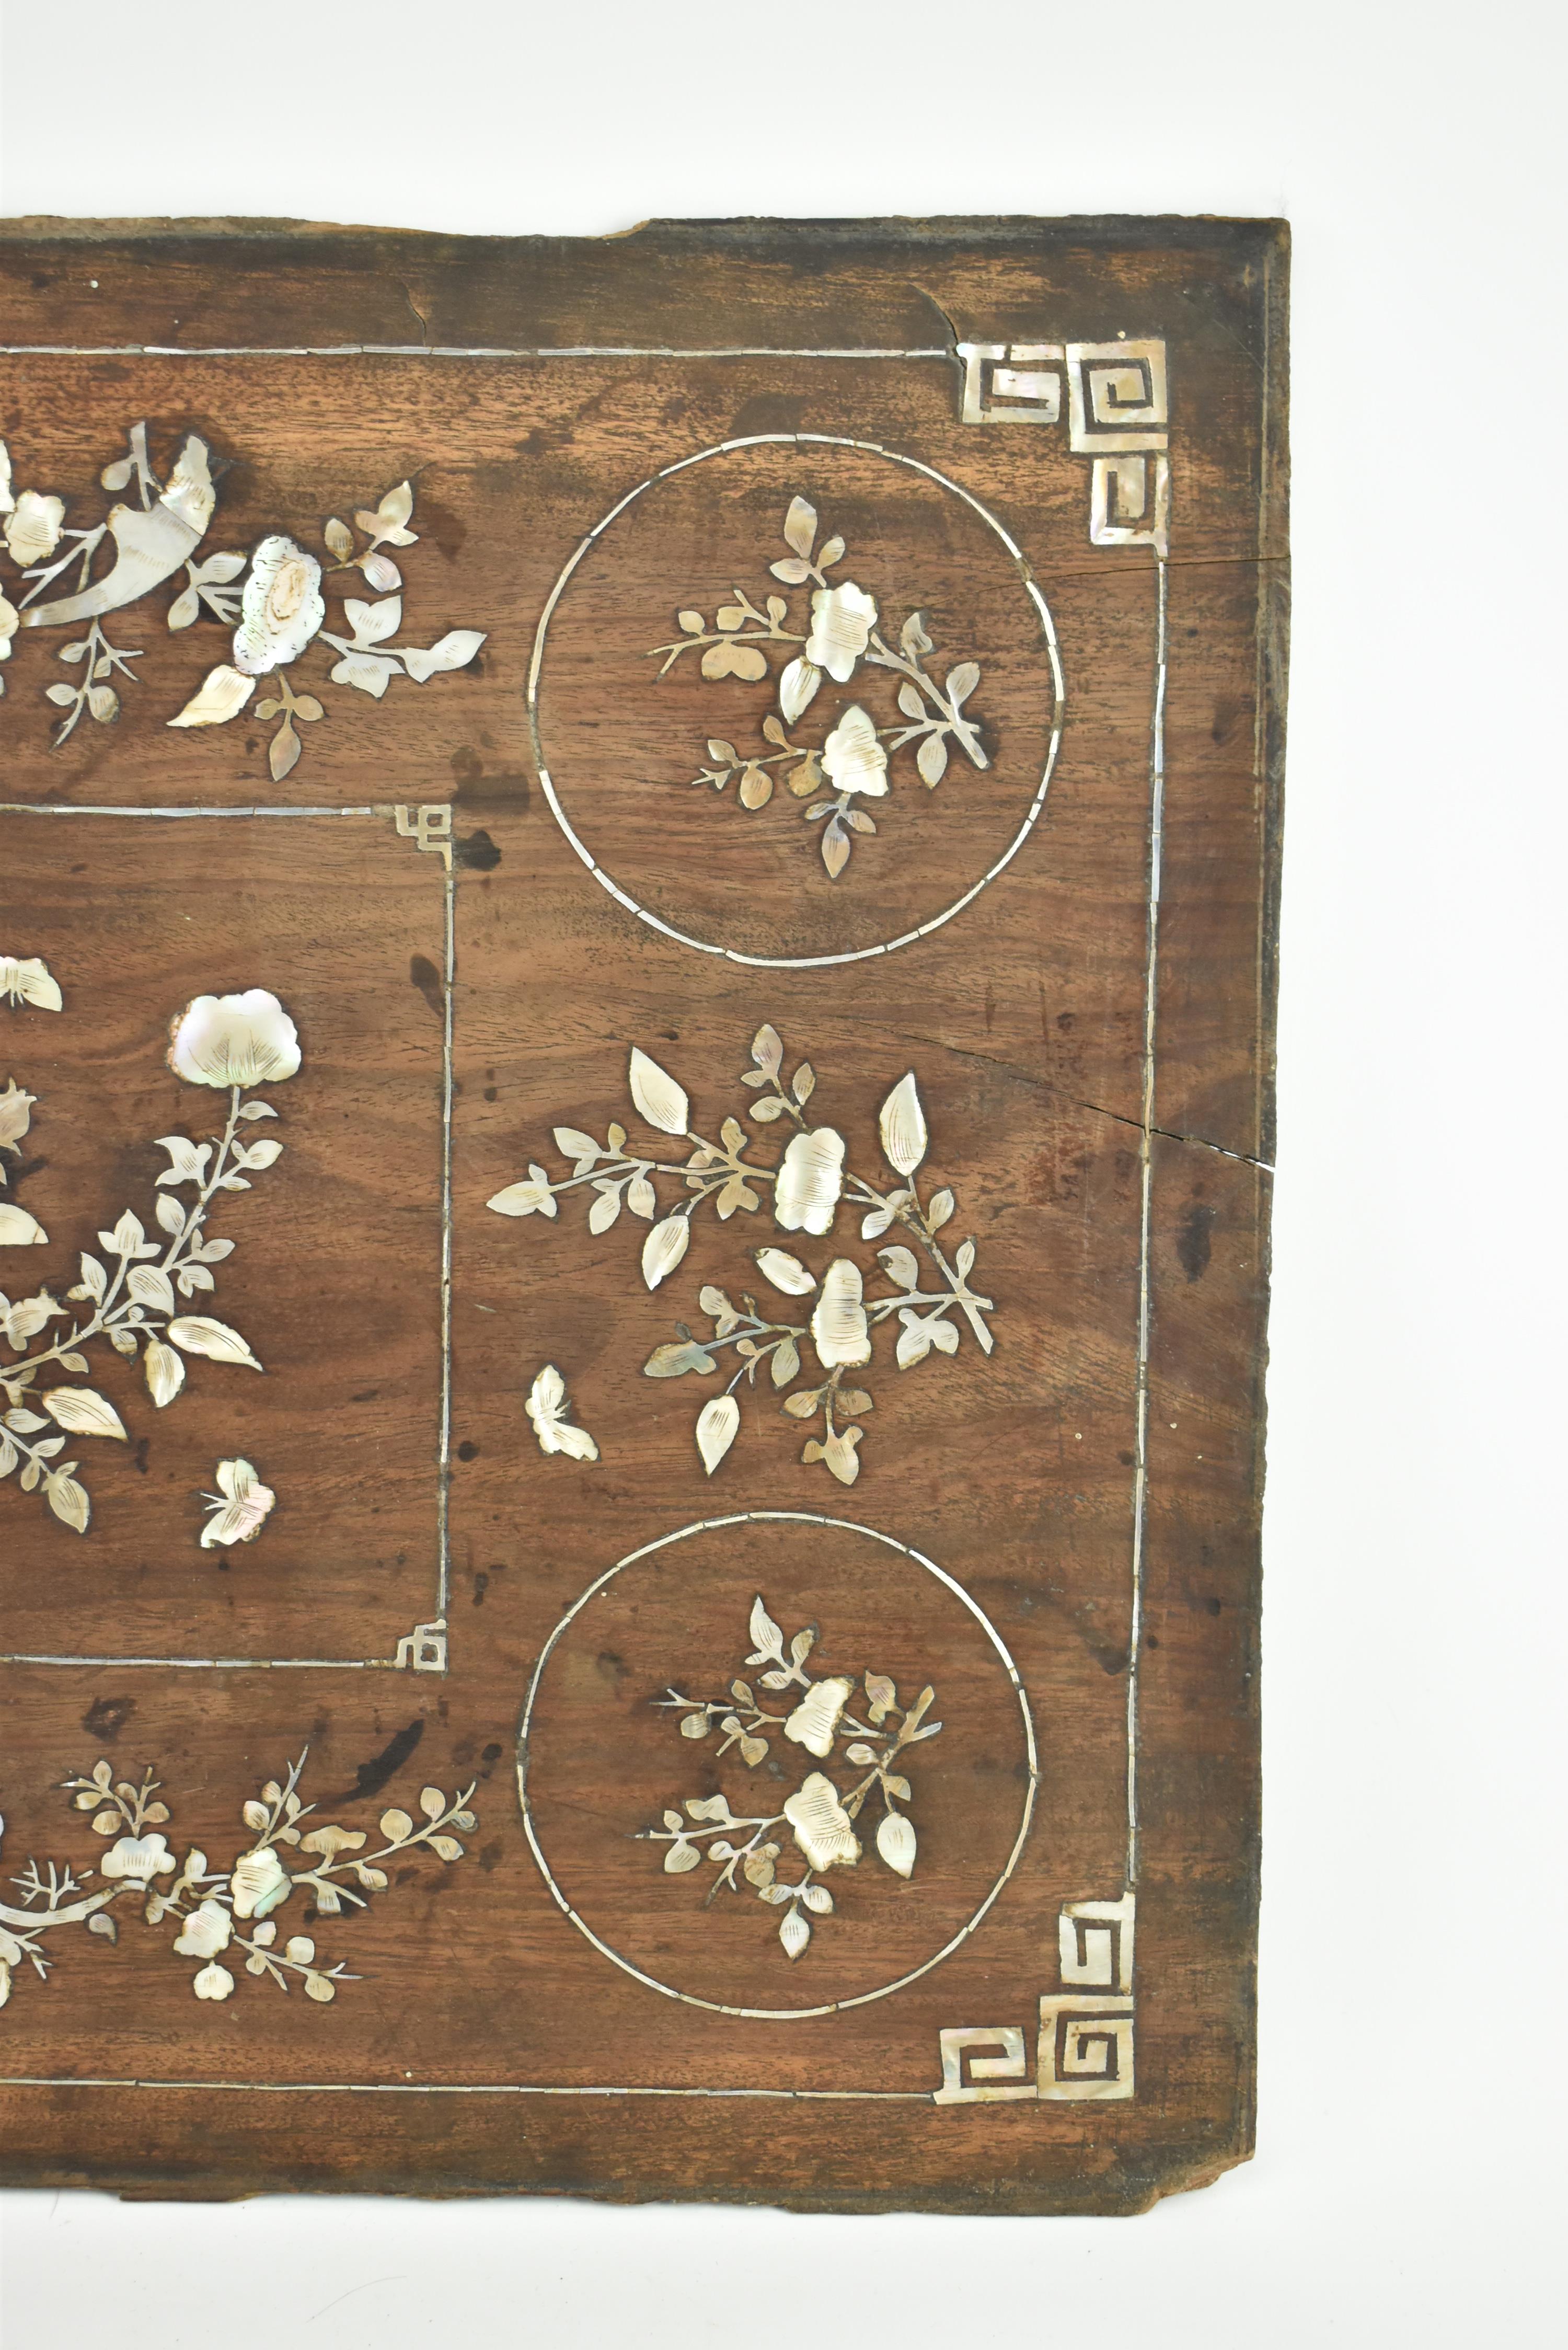 19TH CENTURY CHINESE MOTHER OF PEARL INLAID PANEL TABLETOP - Image 5 of 7